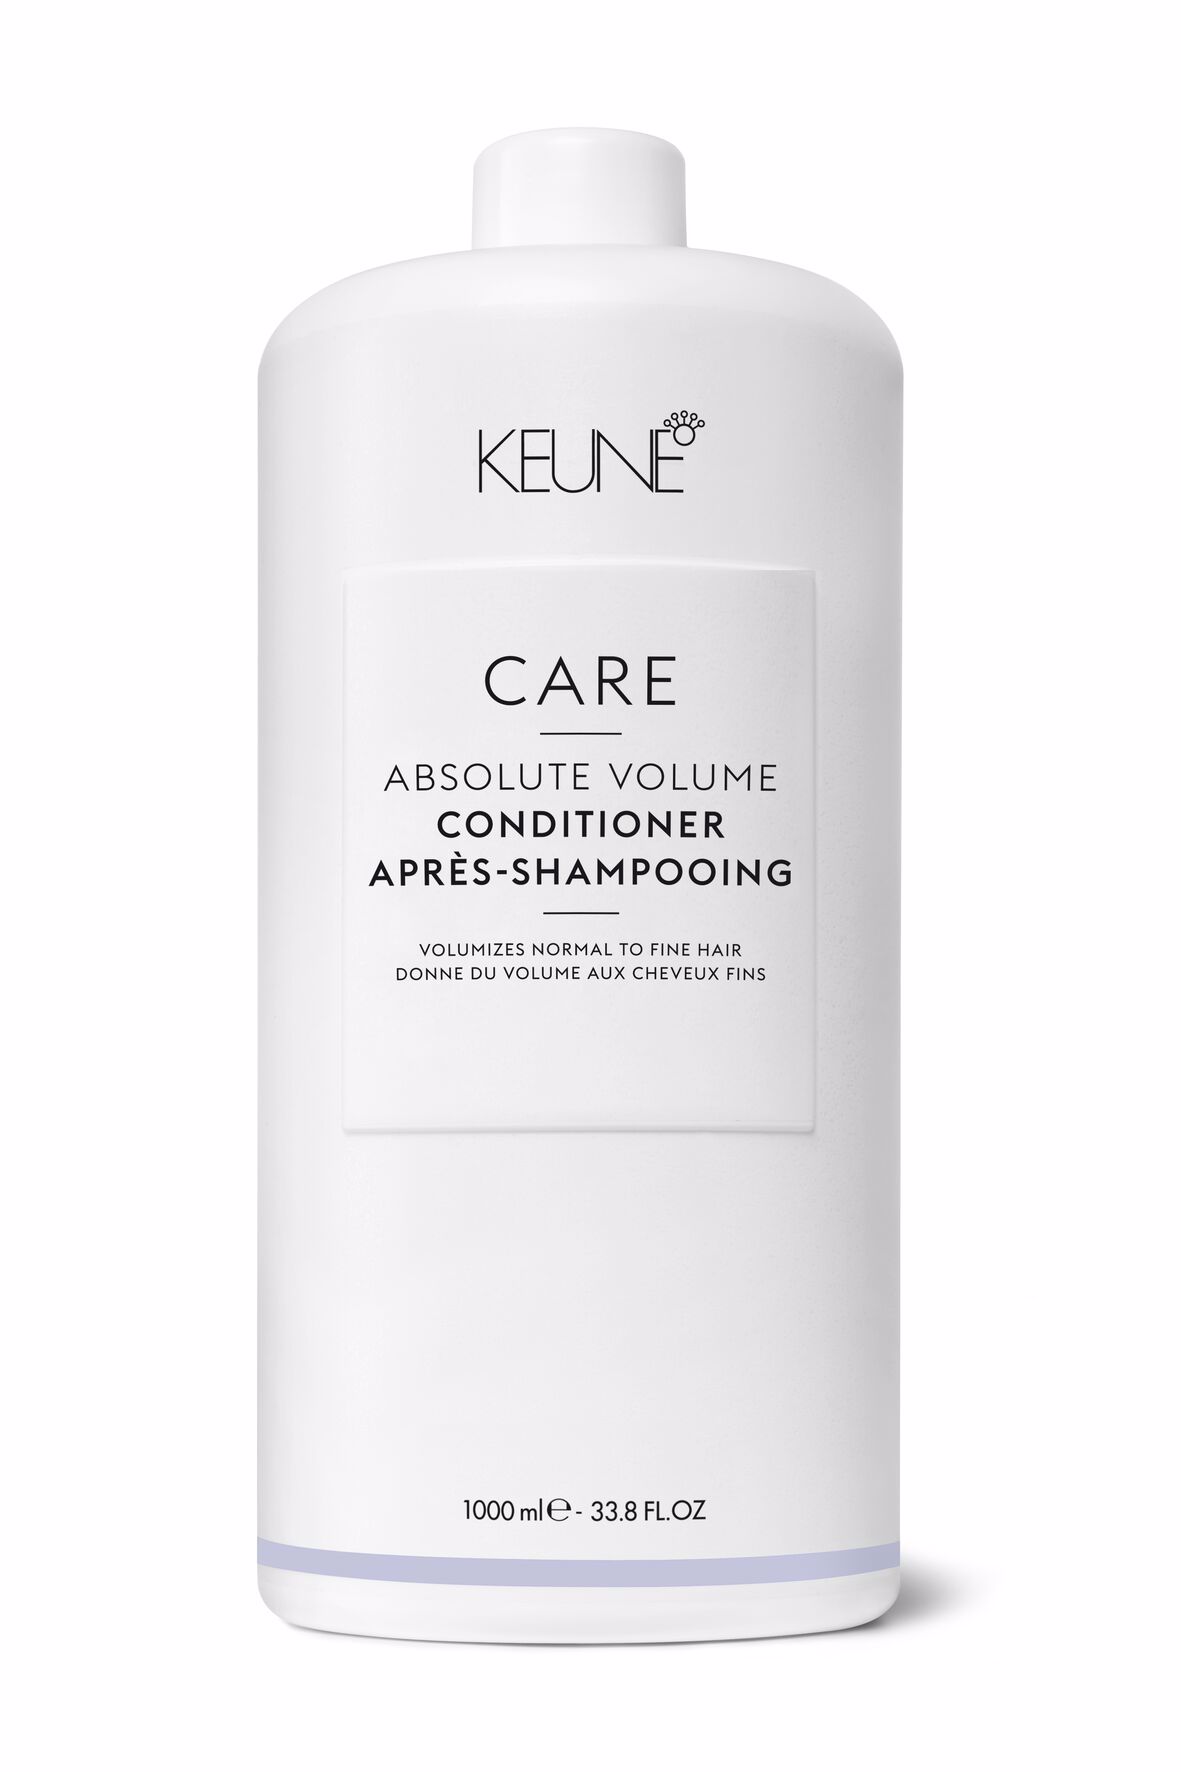 Discover the Care Absolute Volume Conditioner on keune.ch, which gives volume to thin hair without weighing it down. With Provitamin B5 and wheat proteins for strong hair.